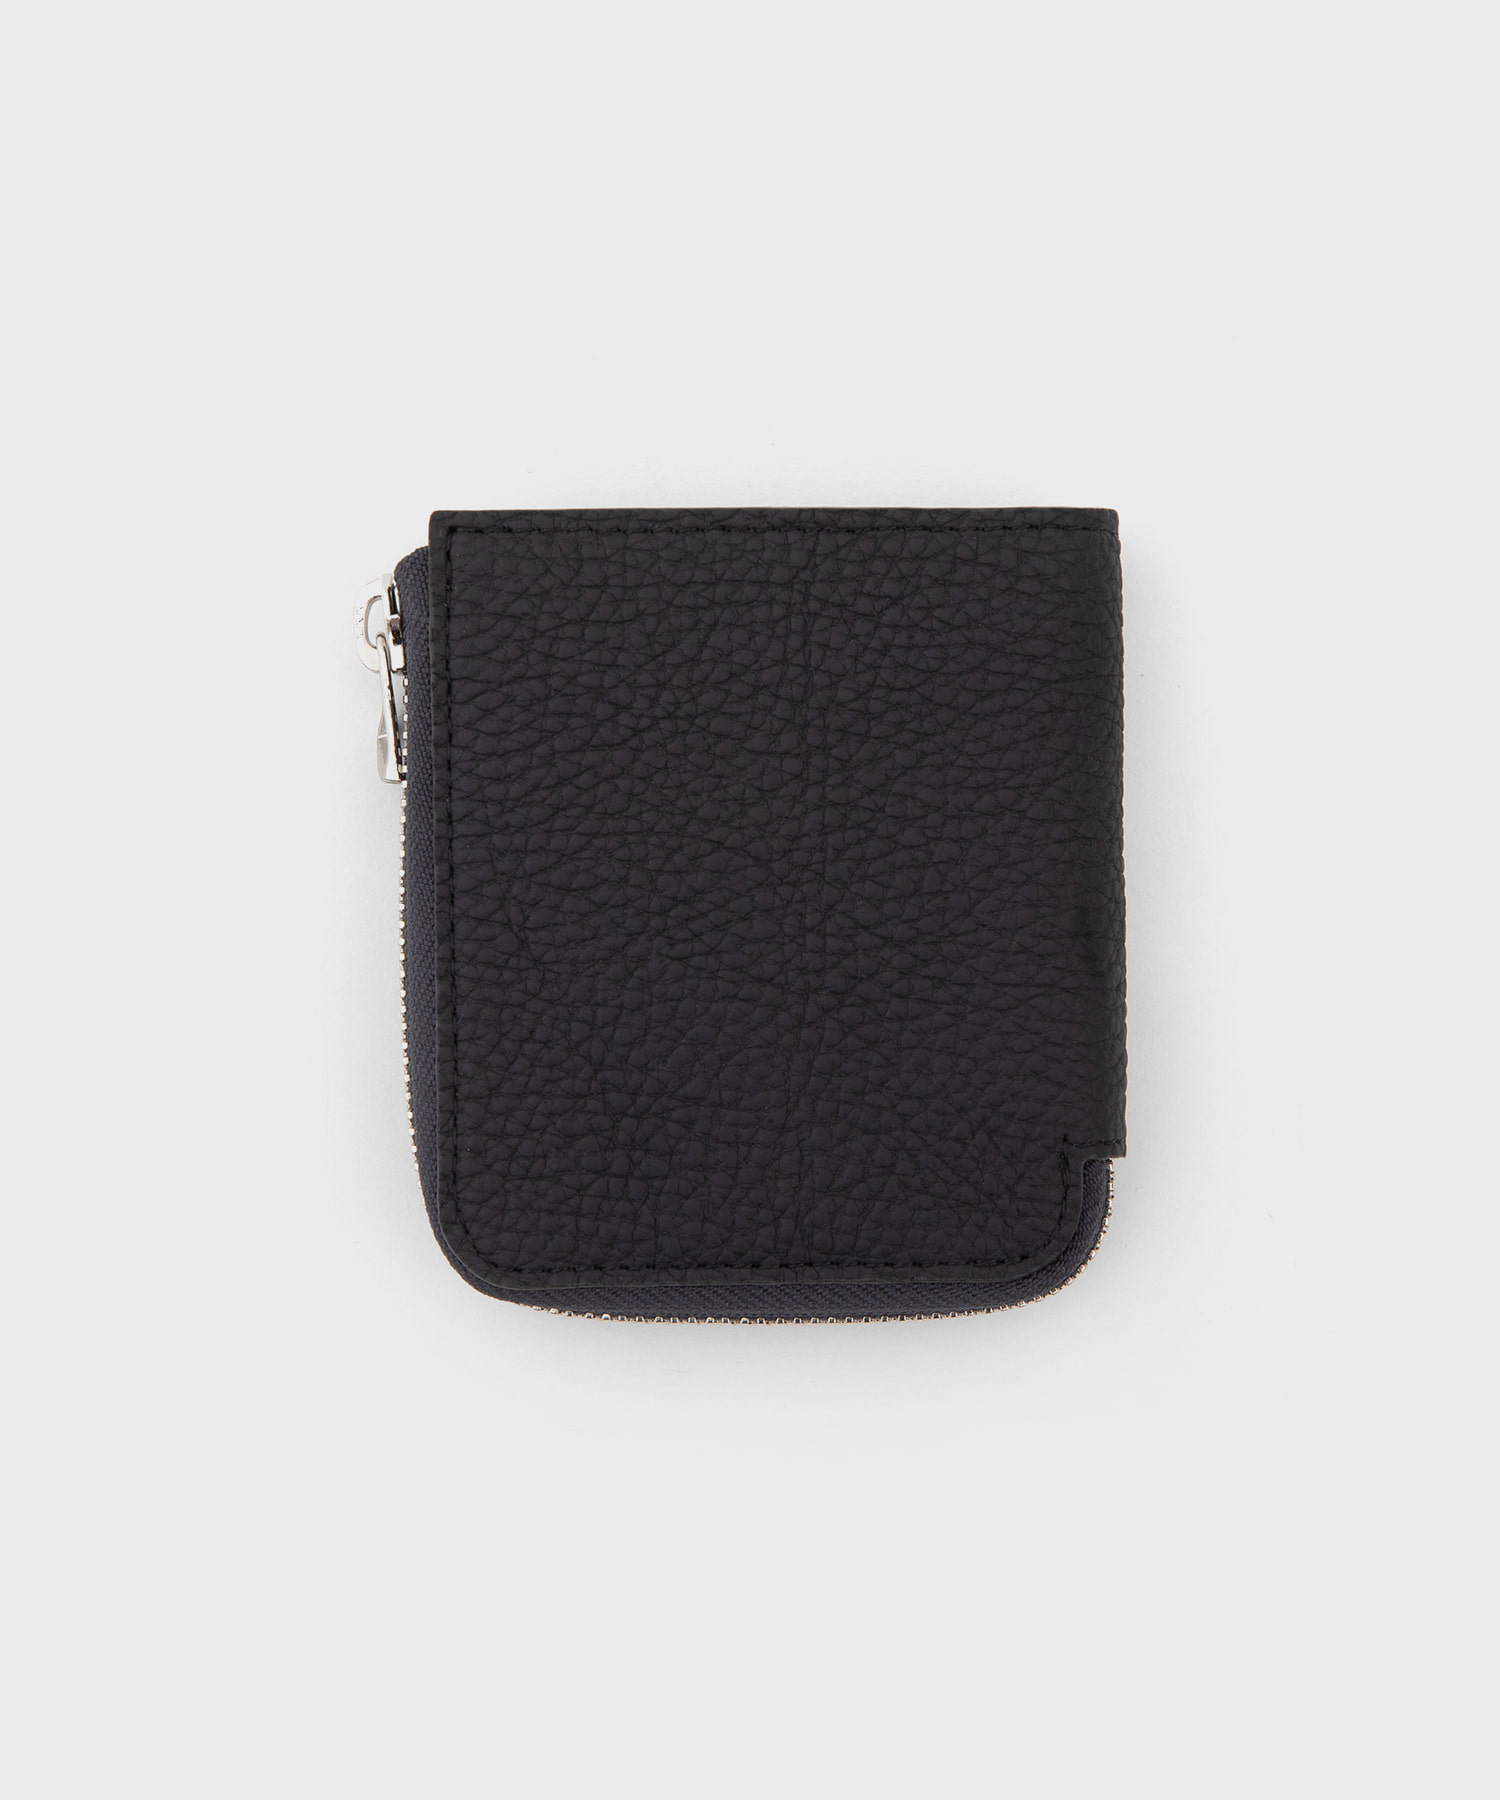 Cristy Very Compact Wallet .5 Diplo Fjord (Black)